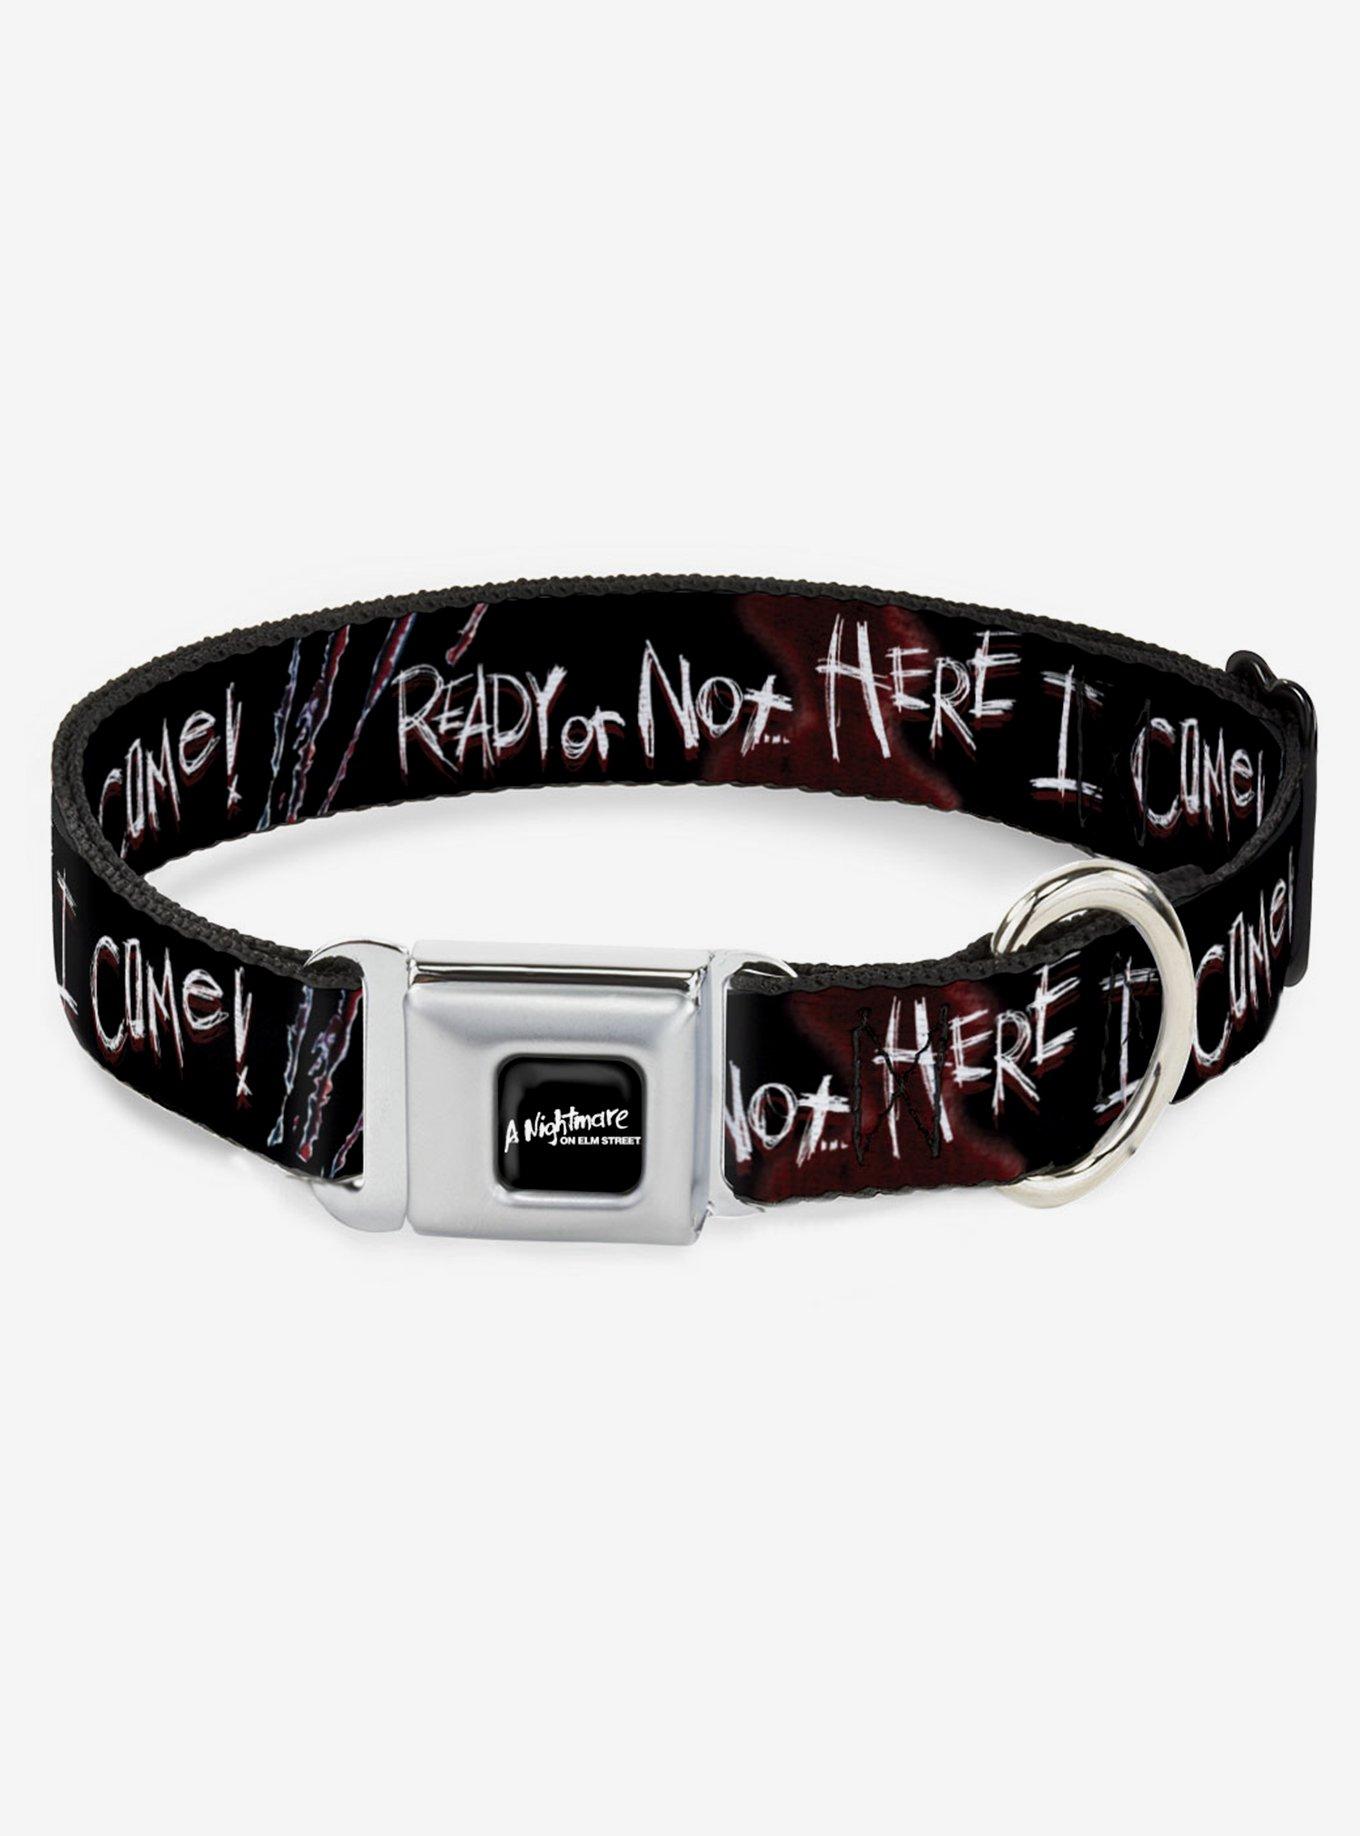 A Nightmare on Elm Street "Ready or Not... Here I Come" Seatbelt Buckle Dog Collar, BLACK, hi-res